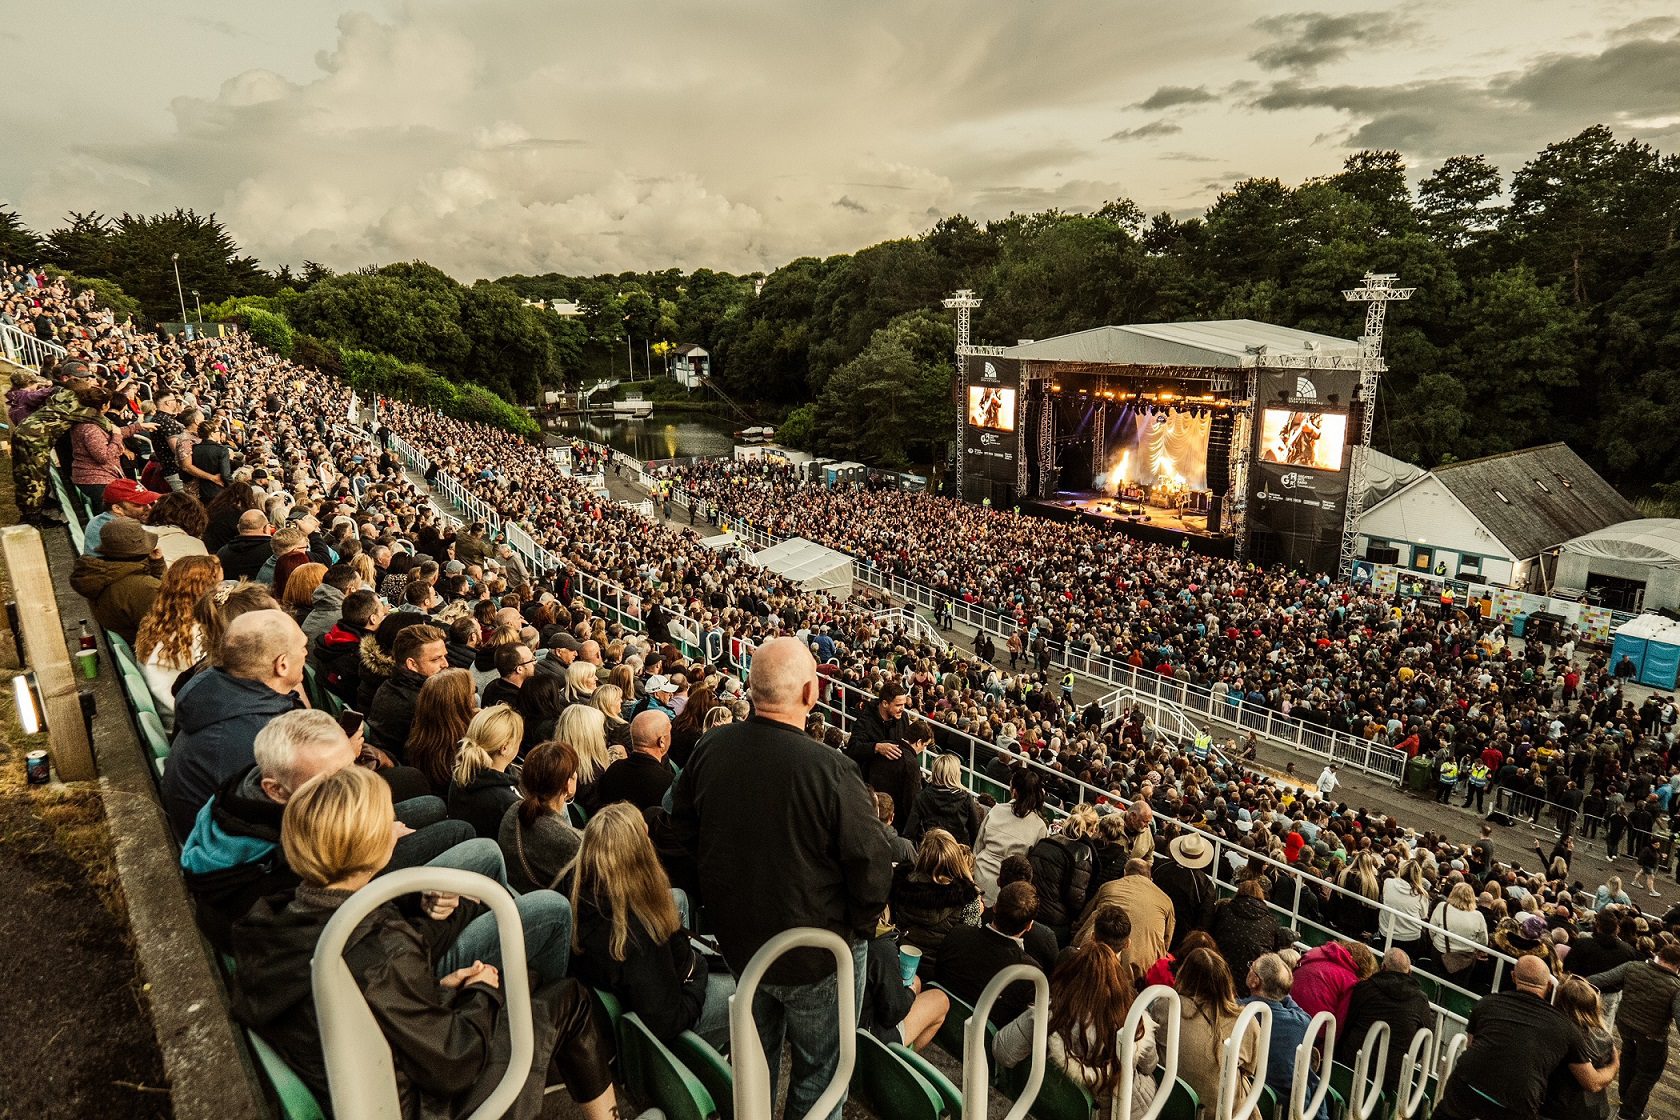 WEEK TO REMEMBER AS SCARBOROUGH OAT CELEBRATES 100th HEADLINE SHOW